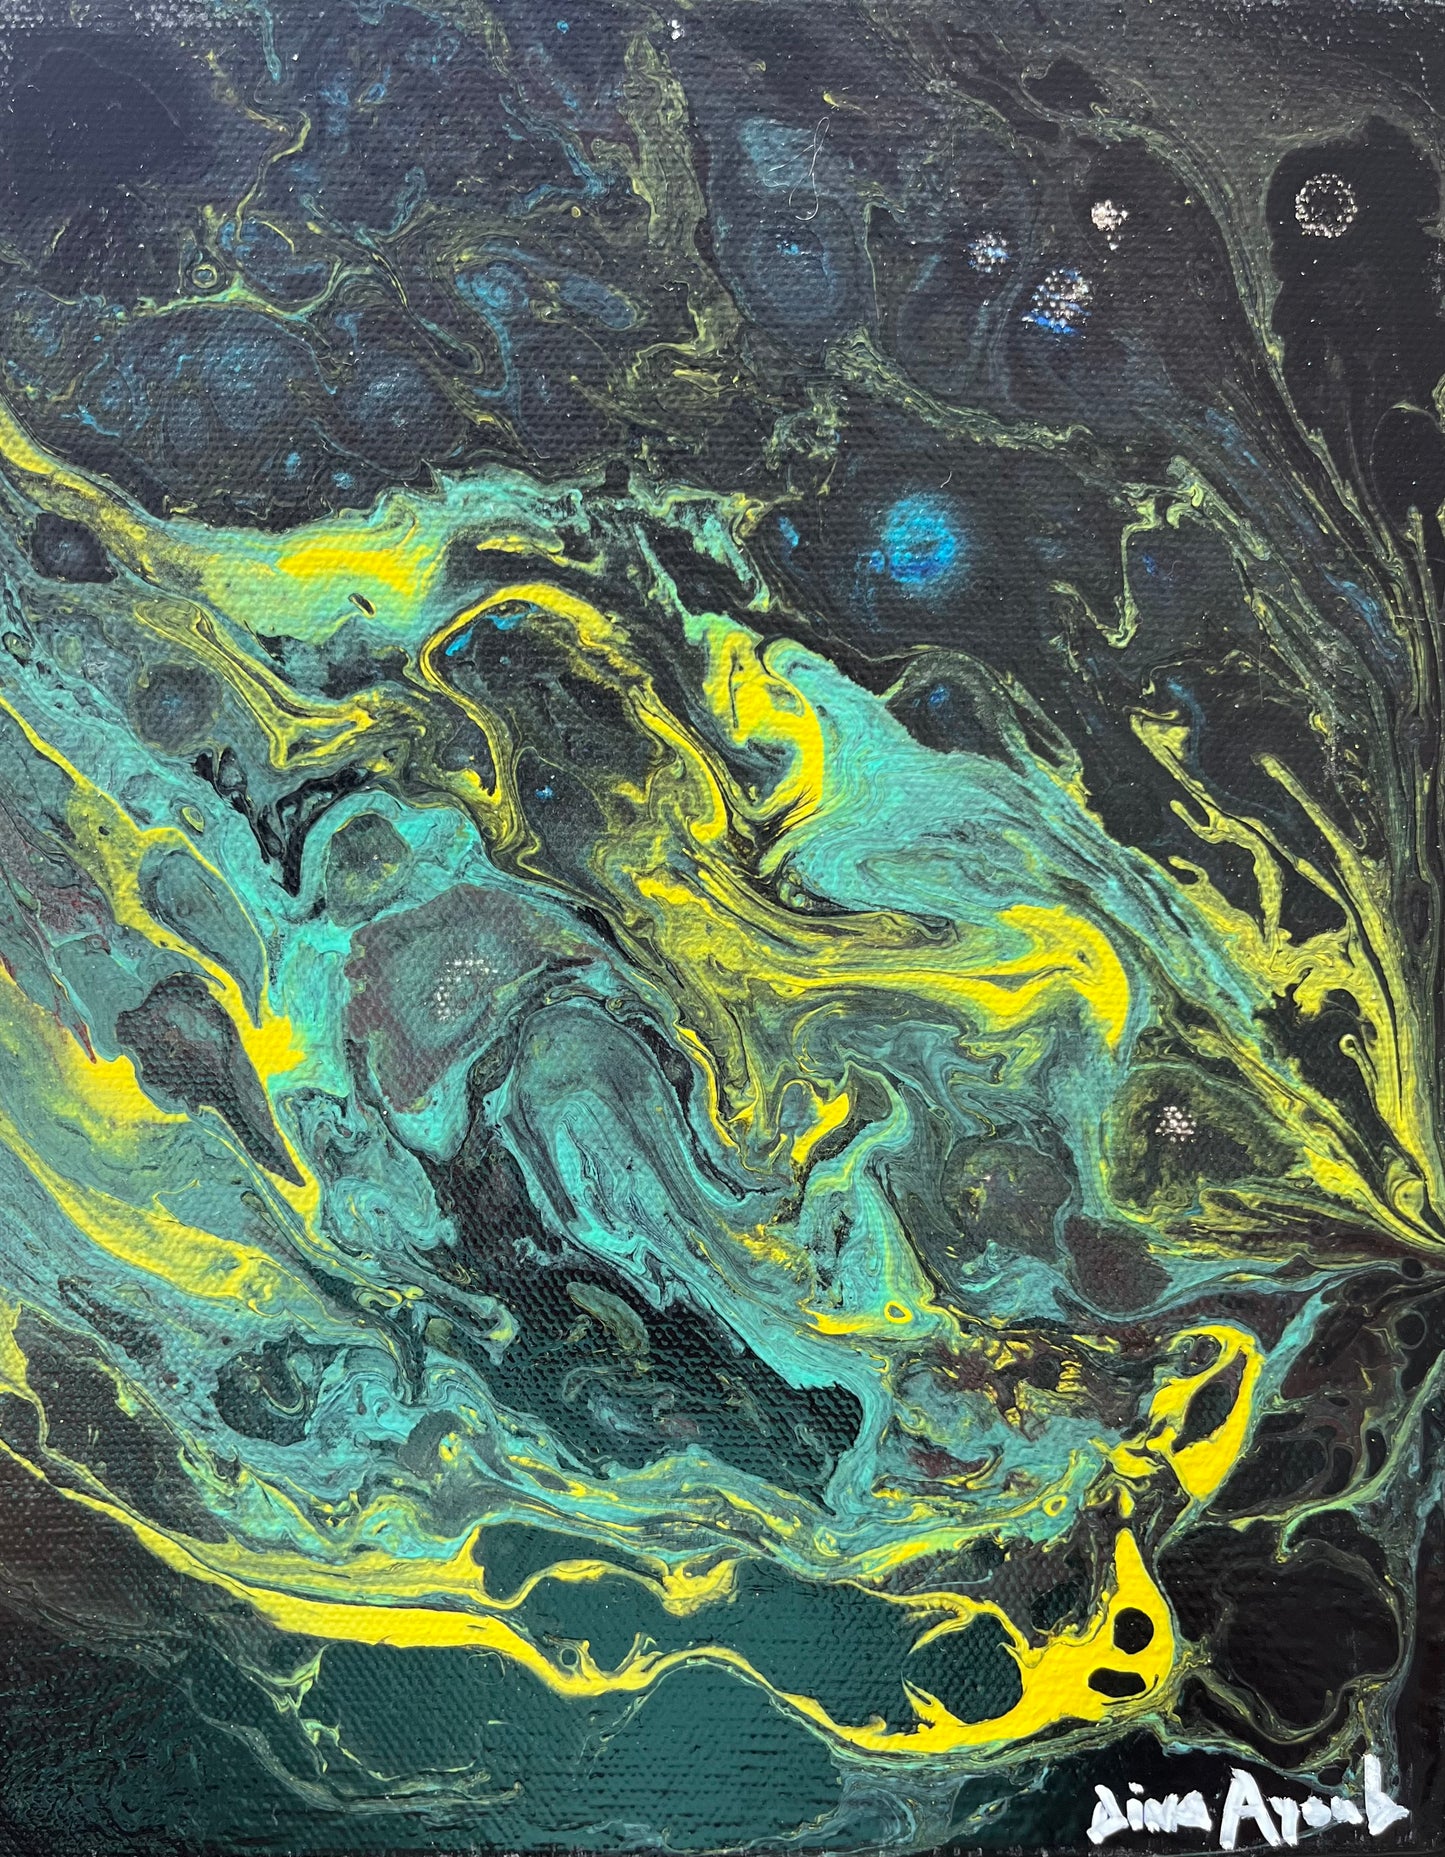 "Meteor," Original Abstract Fluid Art Painting in Black, Yellow and Green.